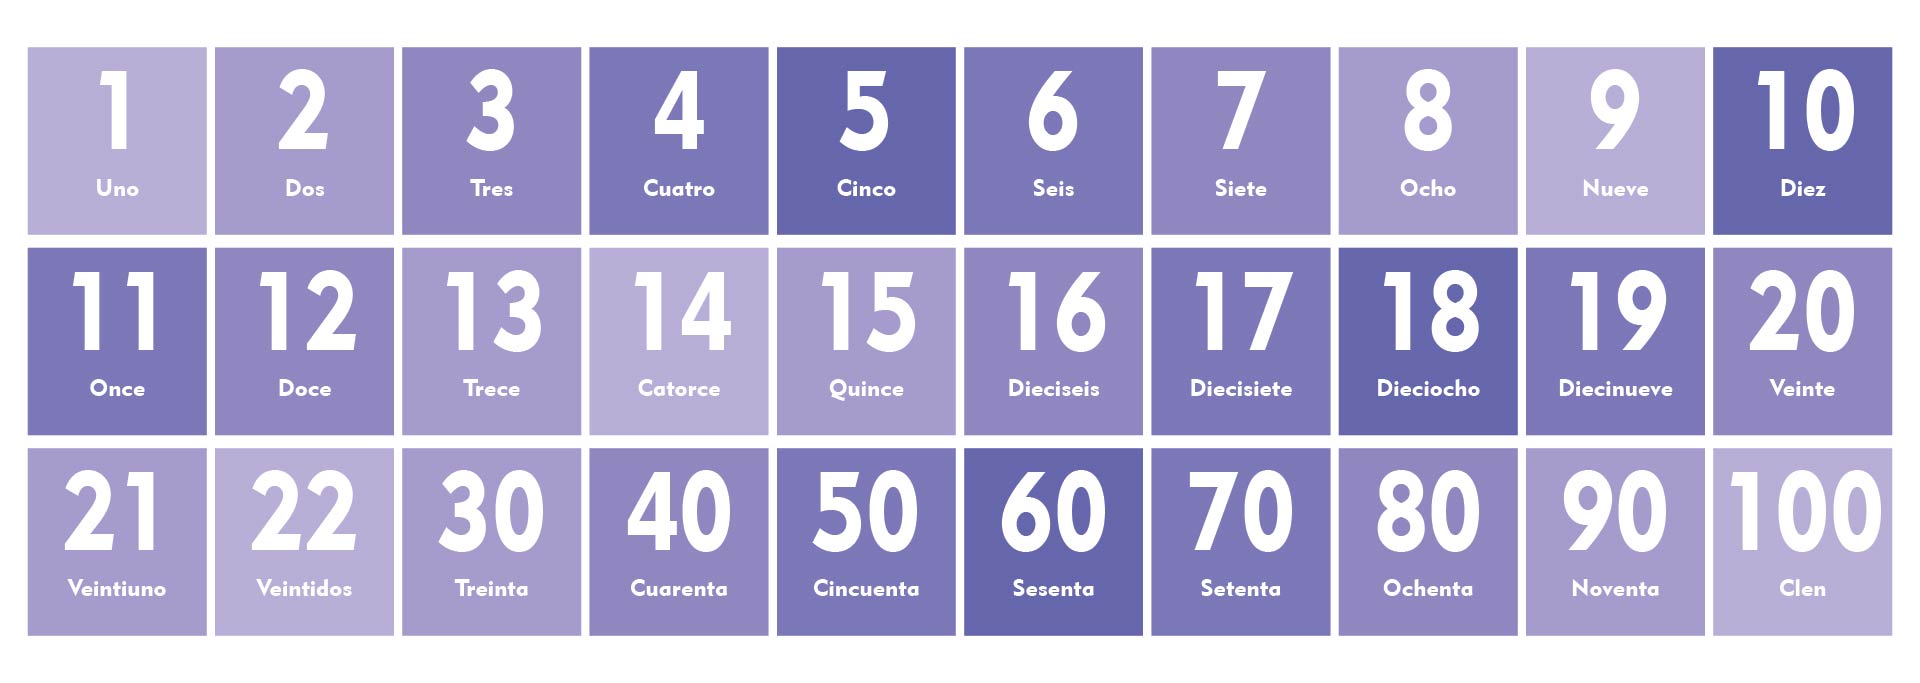 5-best-images-of-spanish-numbers-1-50-printable-spanish-numbers-1-50